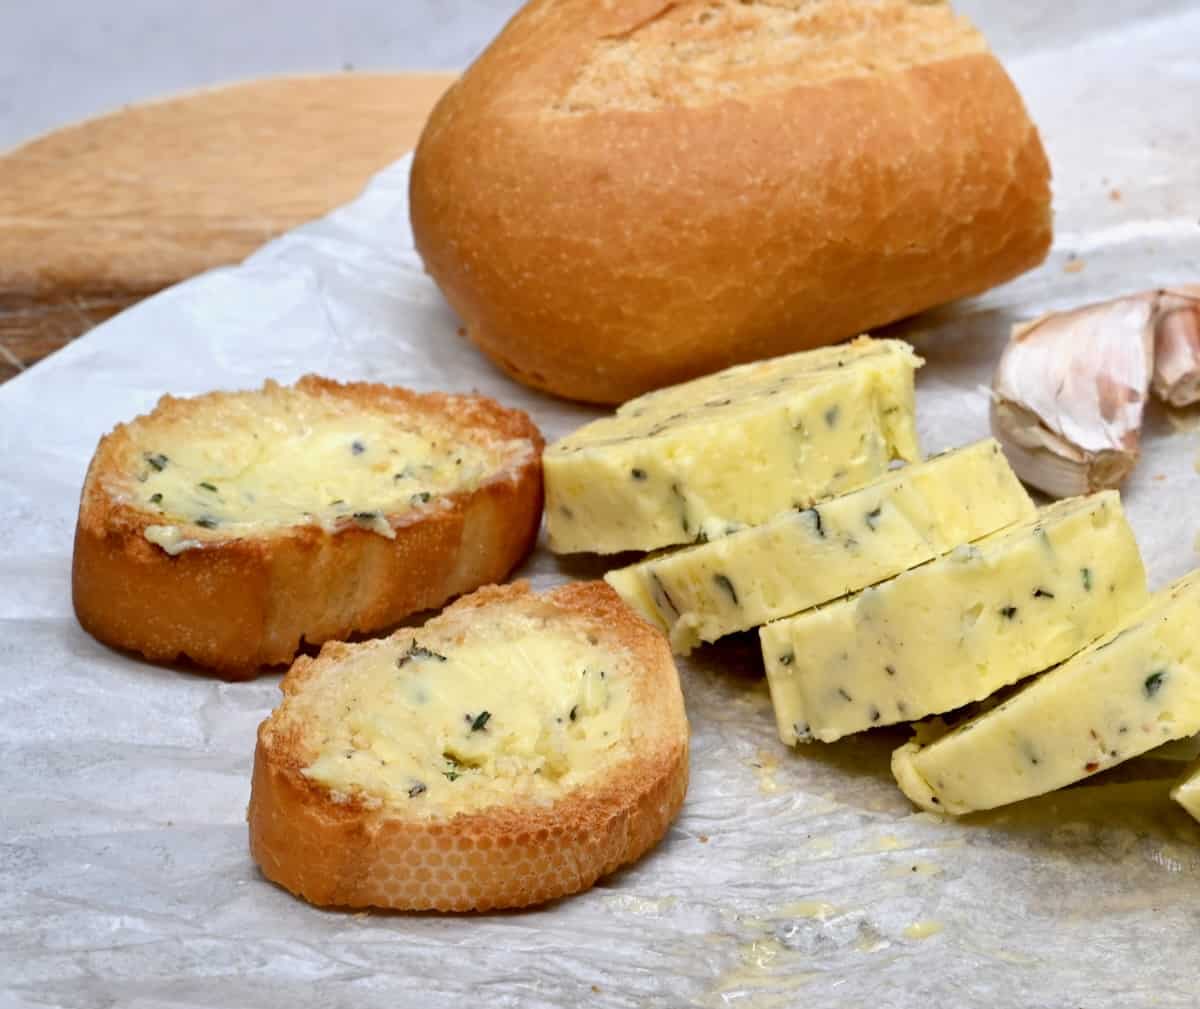 Homemade garlic butter cut into slices with bread slices next to it